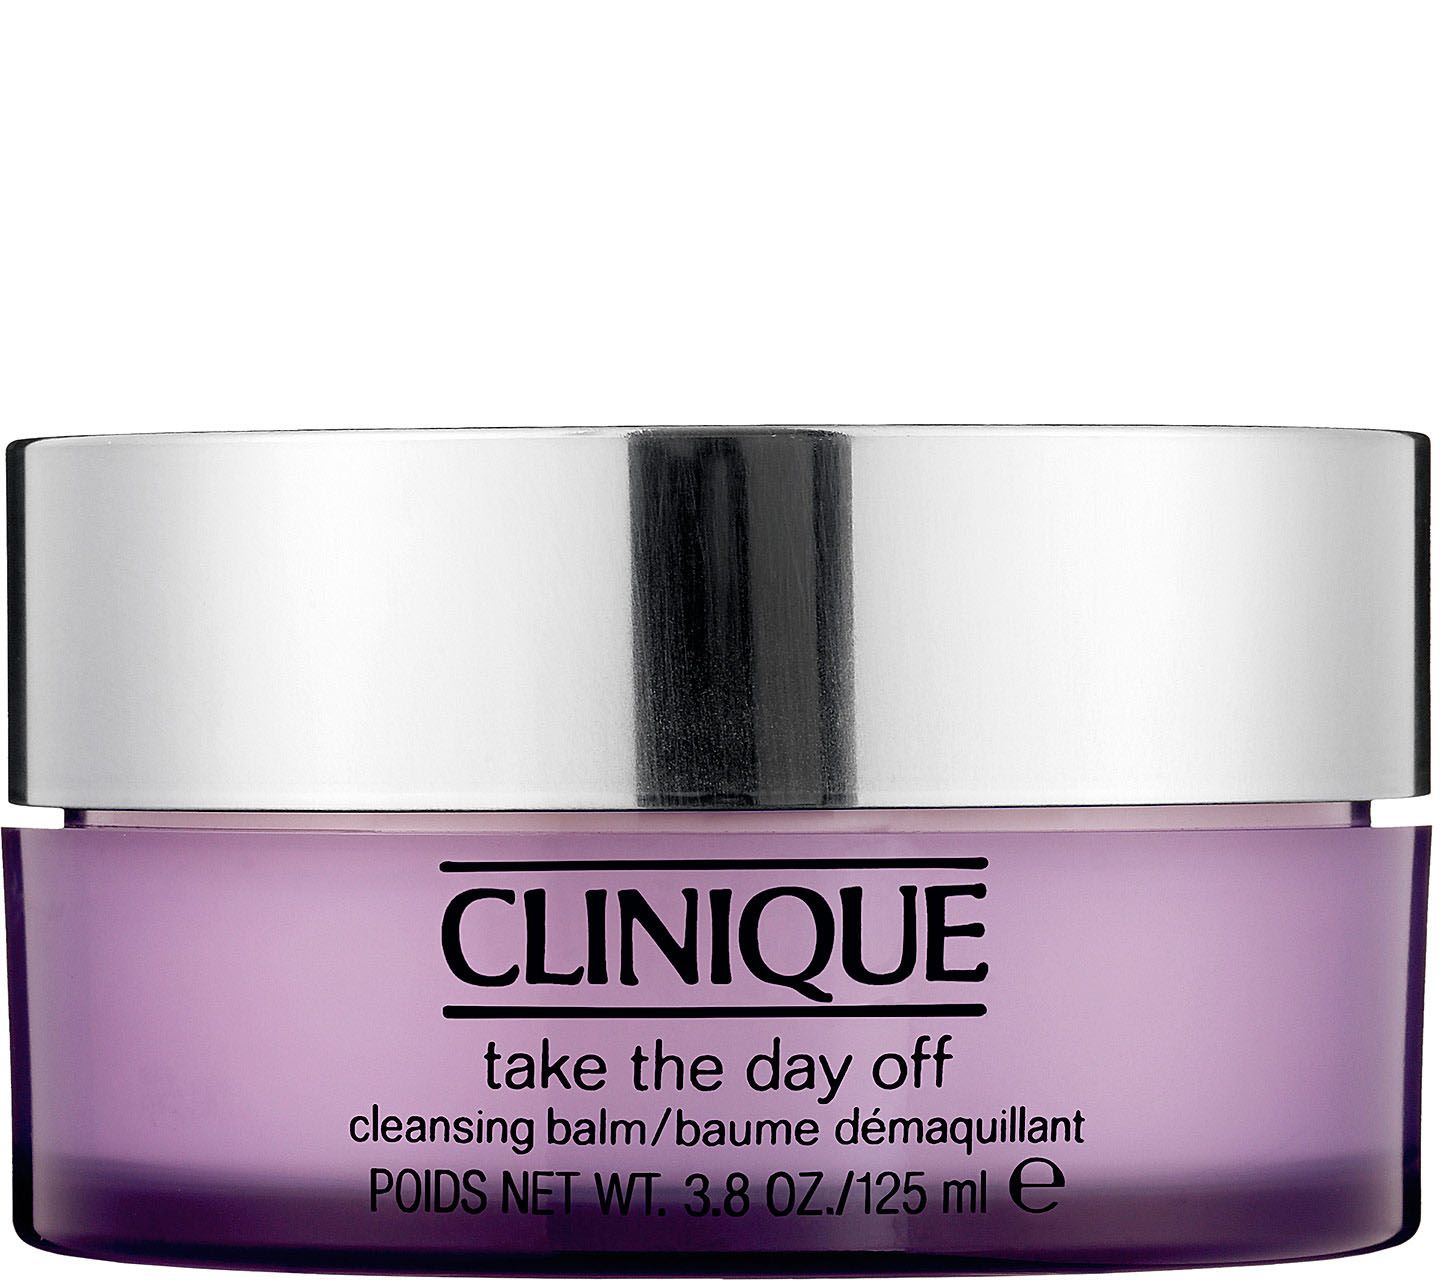 Taxi Globo jazz Clinique Take The Day Off Cleansing Balm 3.8oz - QVC.com